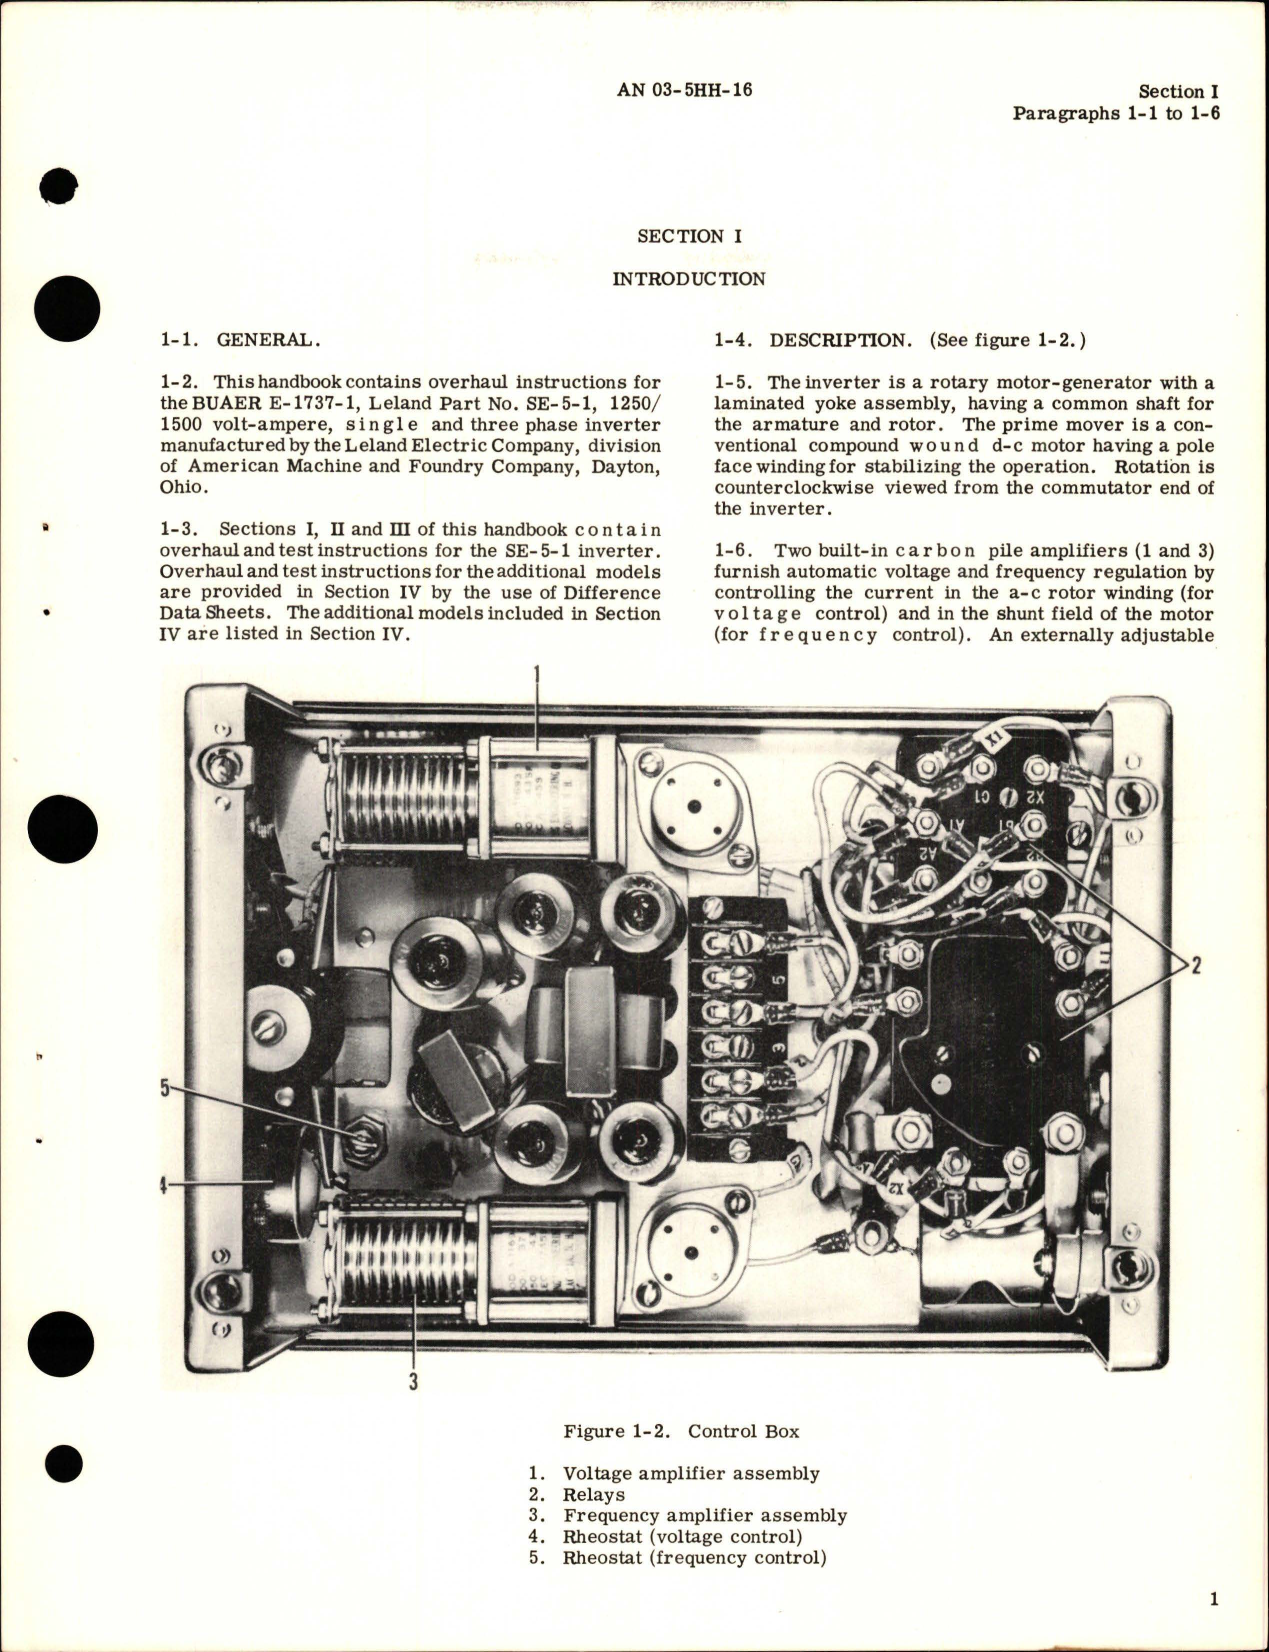 Sample page 5 from AirCorps Library document: Overhaul Instructions for Inverter - Parts SE-5-1 and SE-5-2